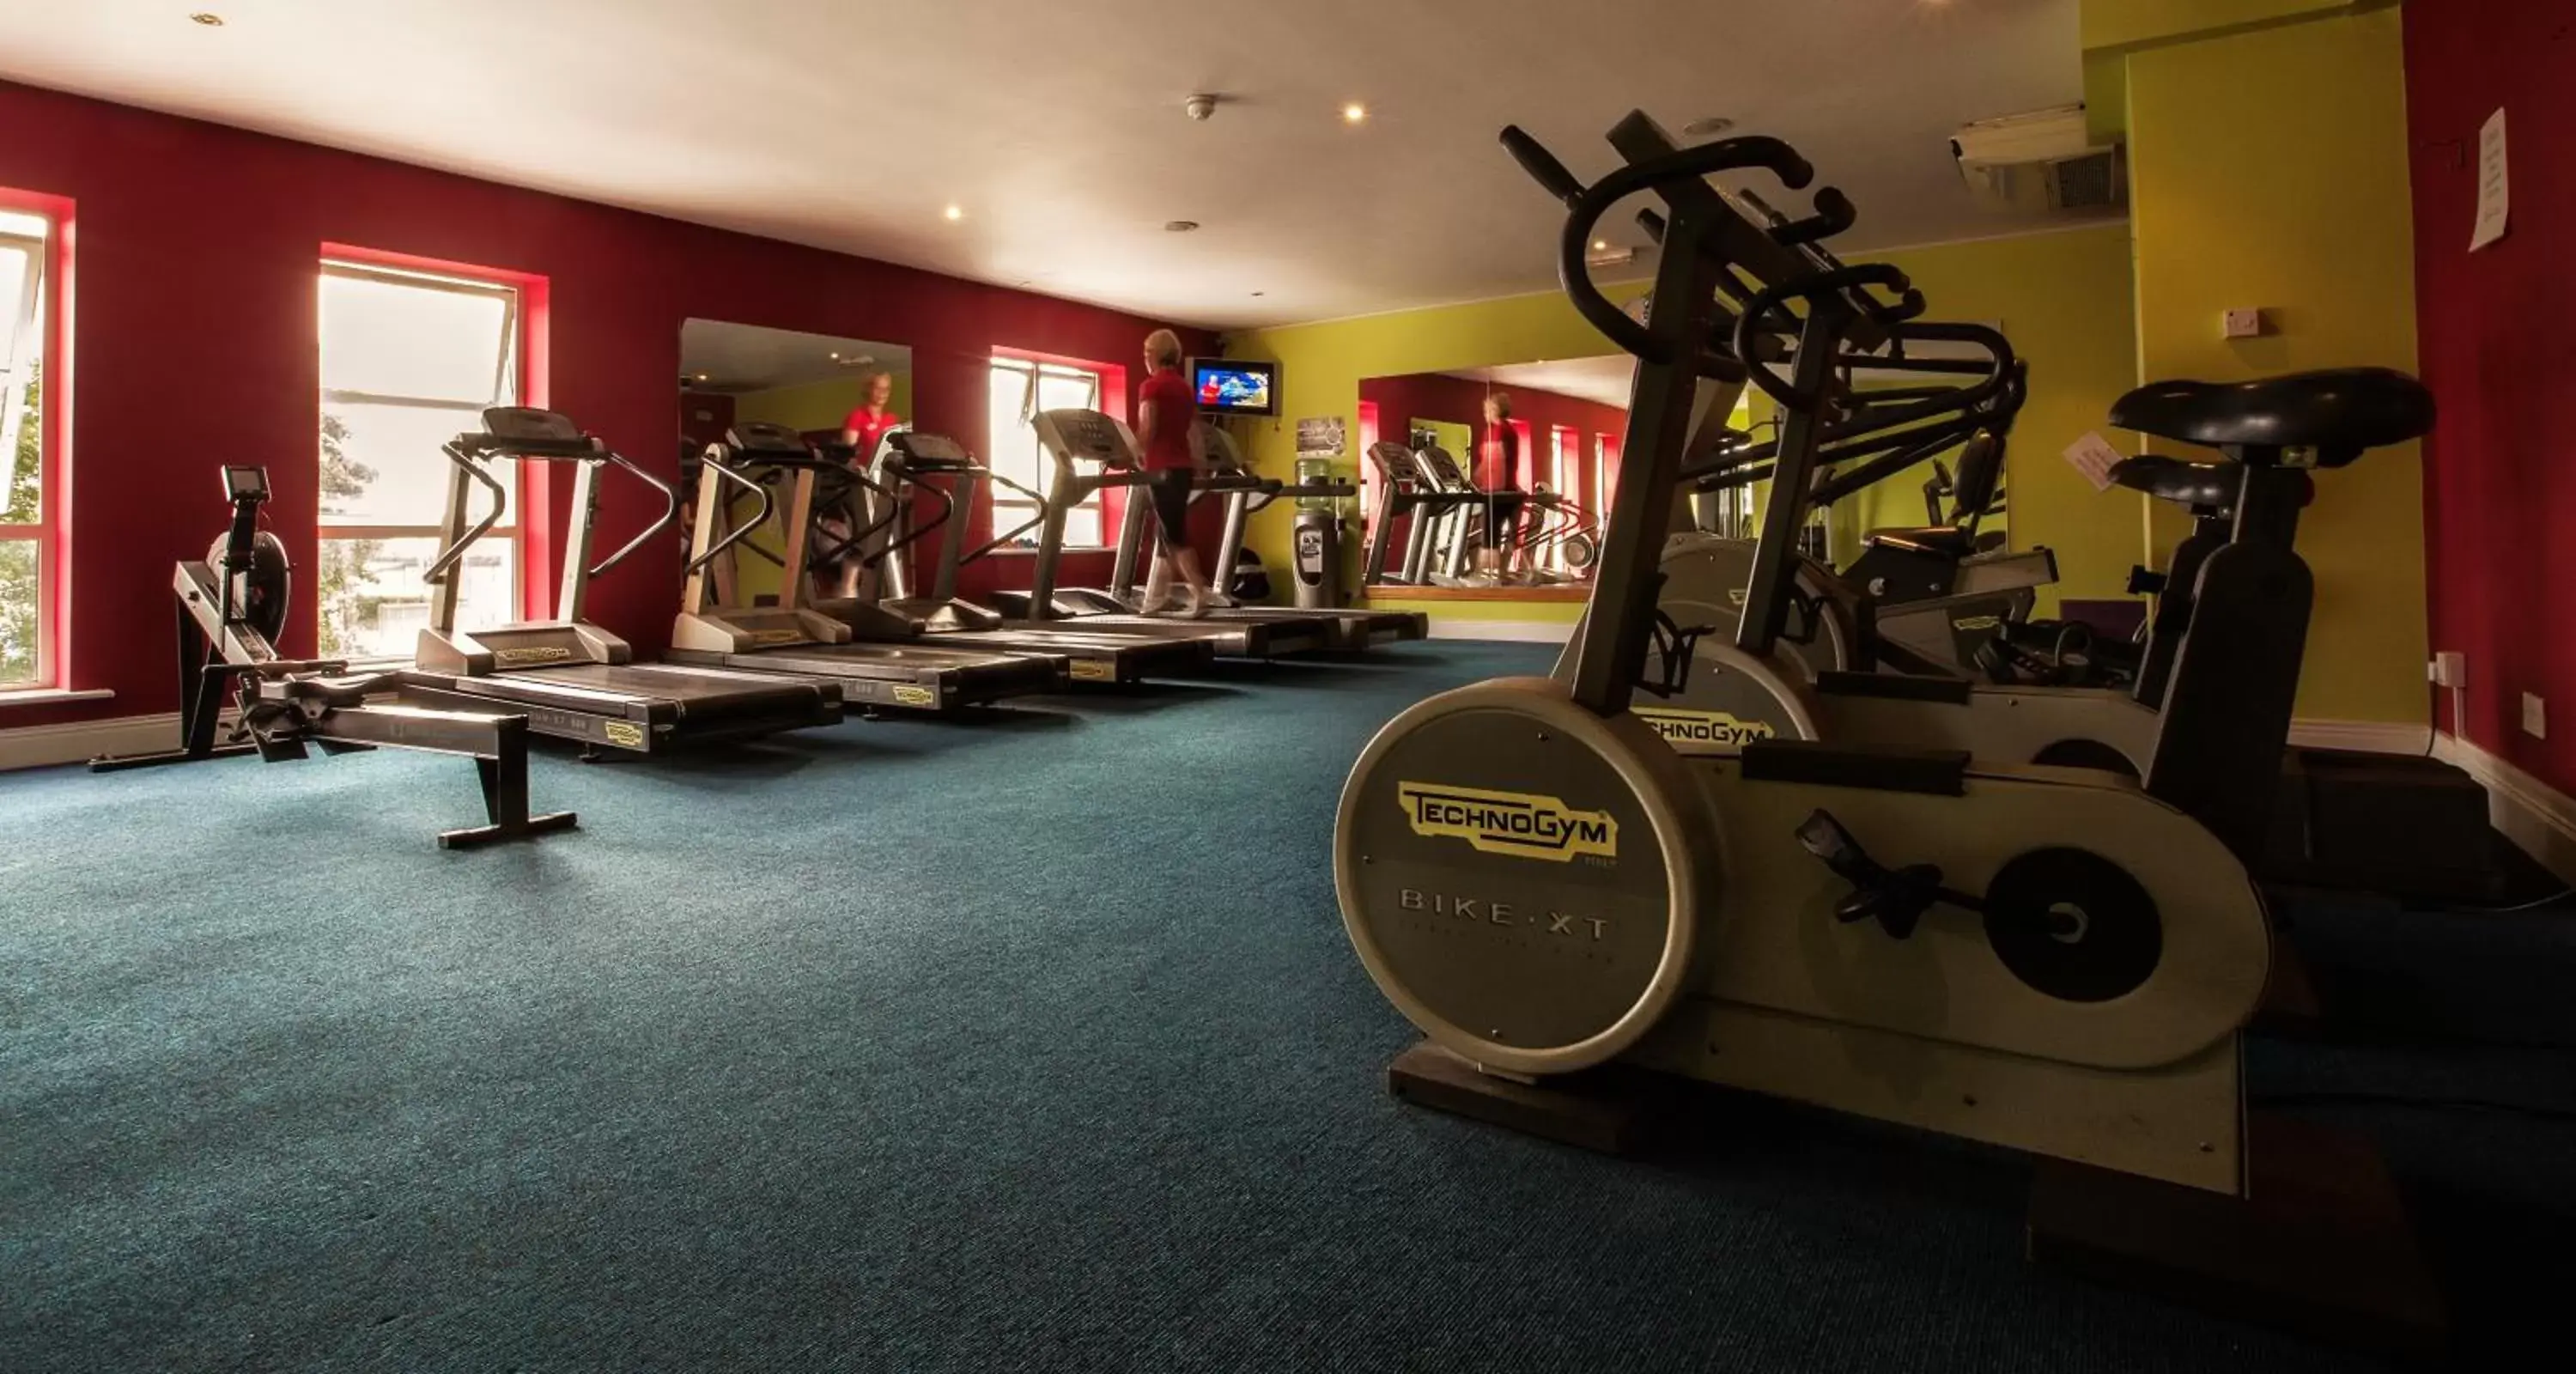 Fitness centre/facilities, Fitness Center/Facilities in Clanree Hotel & Leisure Centre